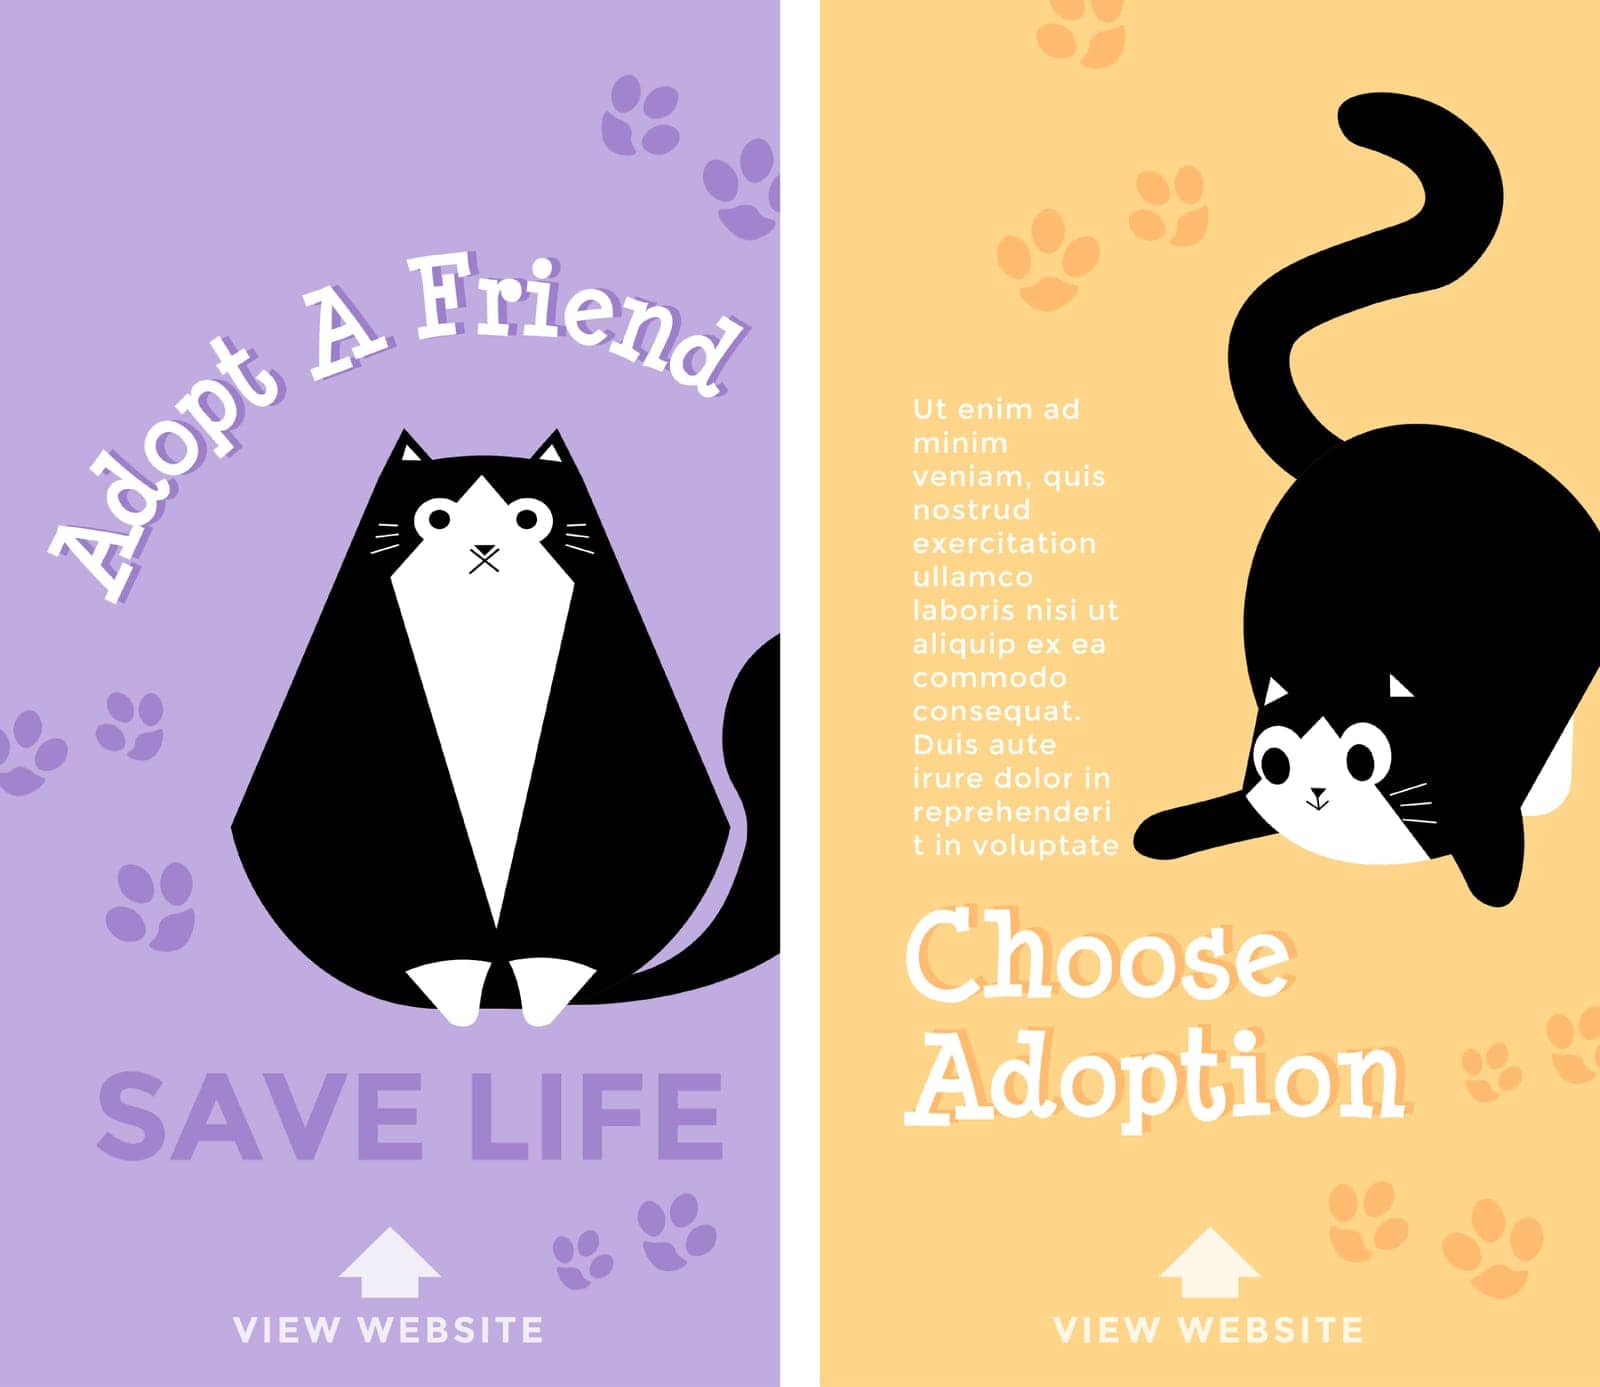 Choose adoption and save life. Adopt pet from veterinary. Get kitty and care for fluffy animal. Banner or advertisement with whiskered friends for kittens lovers and homeowners. Vector in flat style